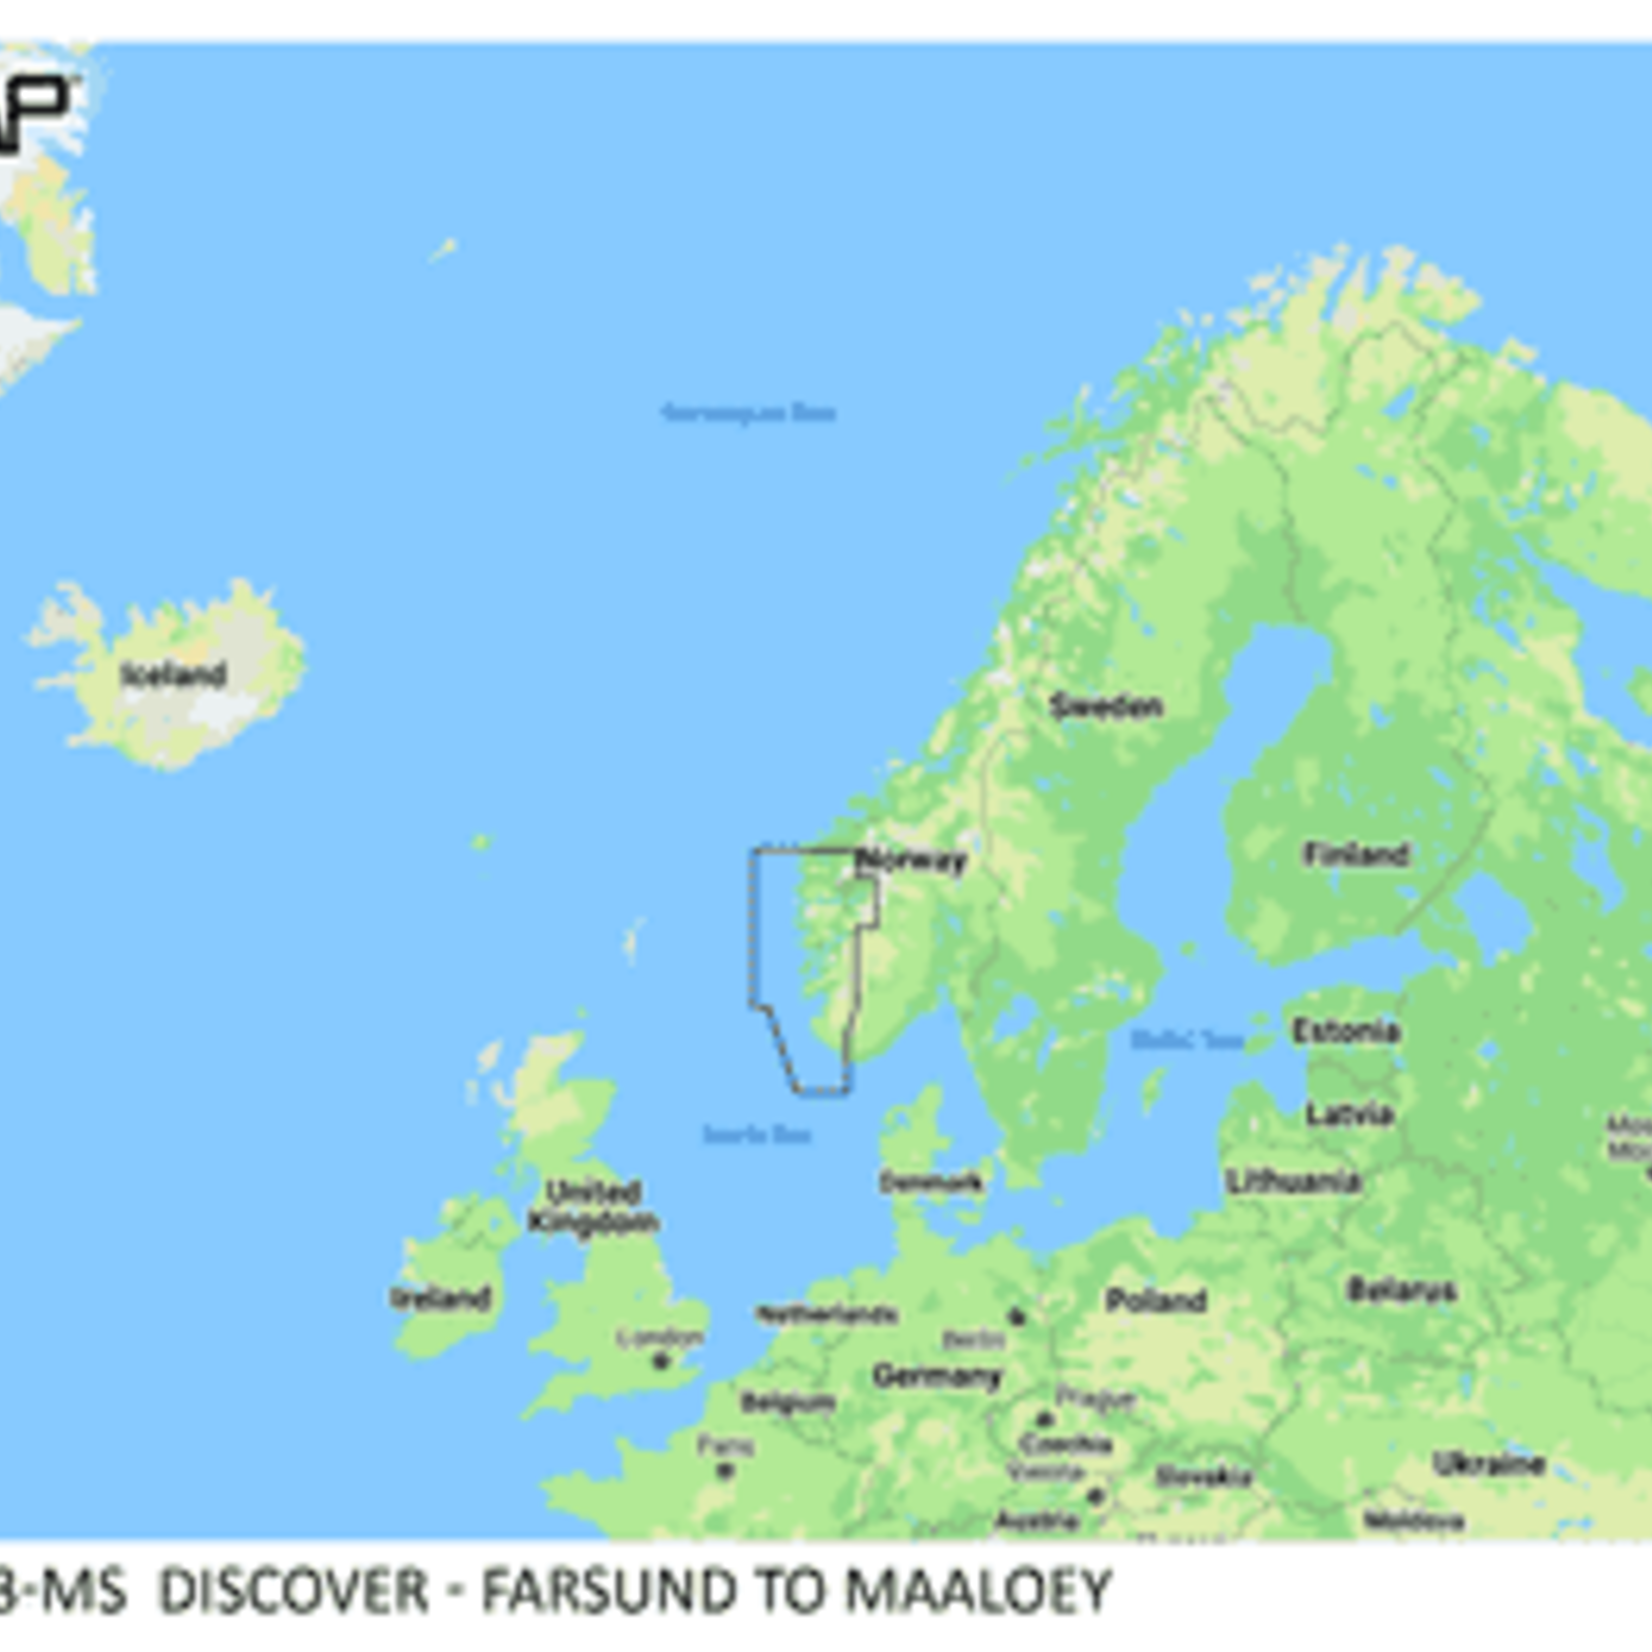 C-MAP DISCOVER - Farsund to Måløy